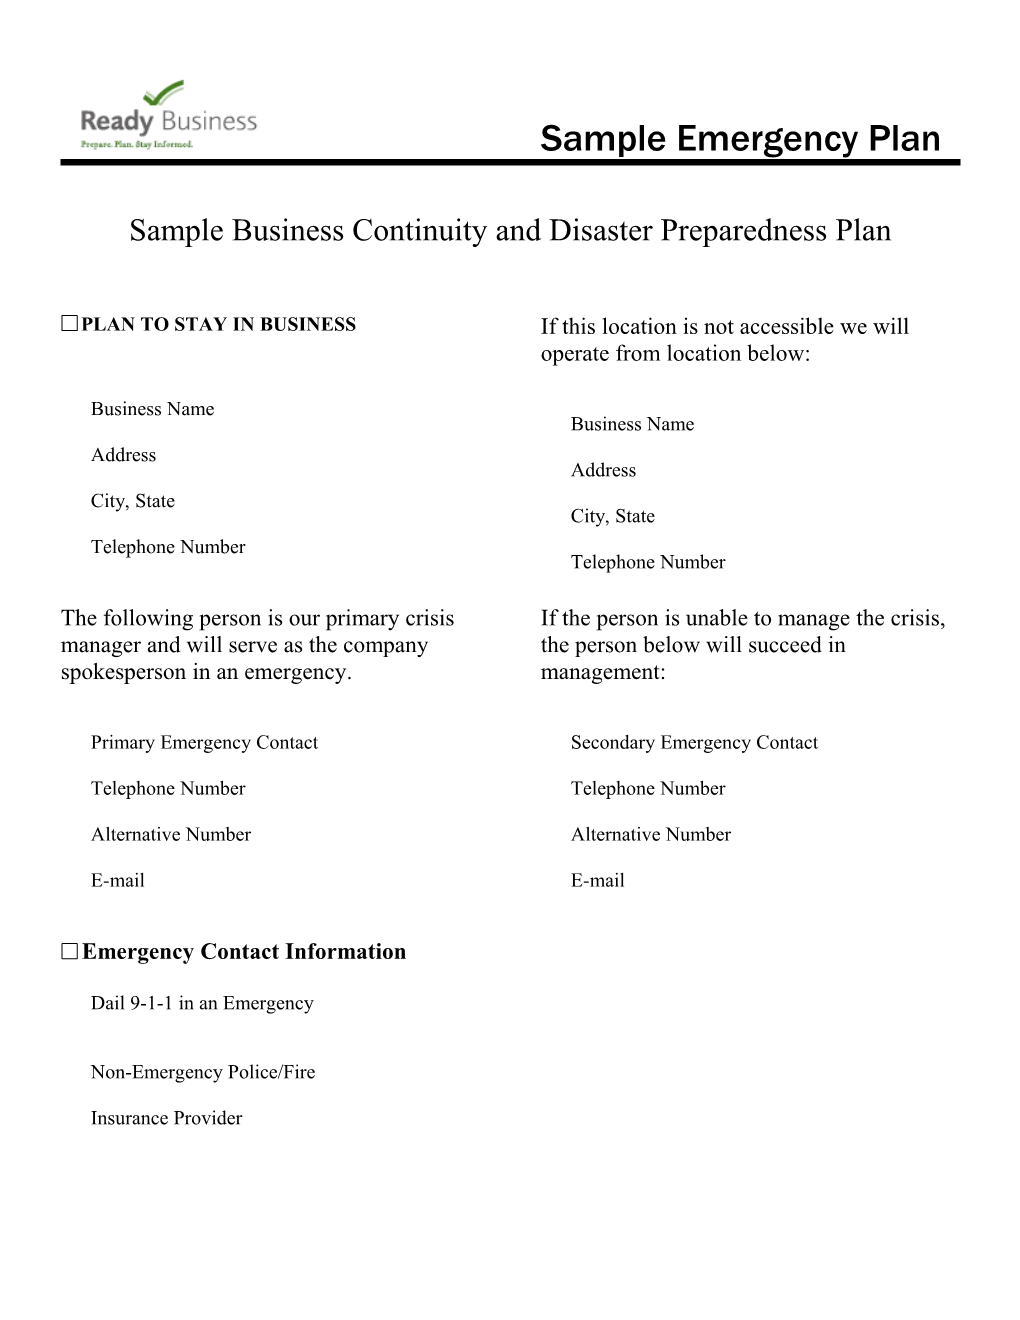 Sample Business Continuity and Disaster Preparedness Plan